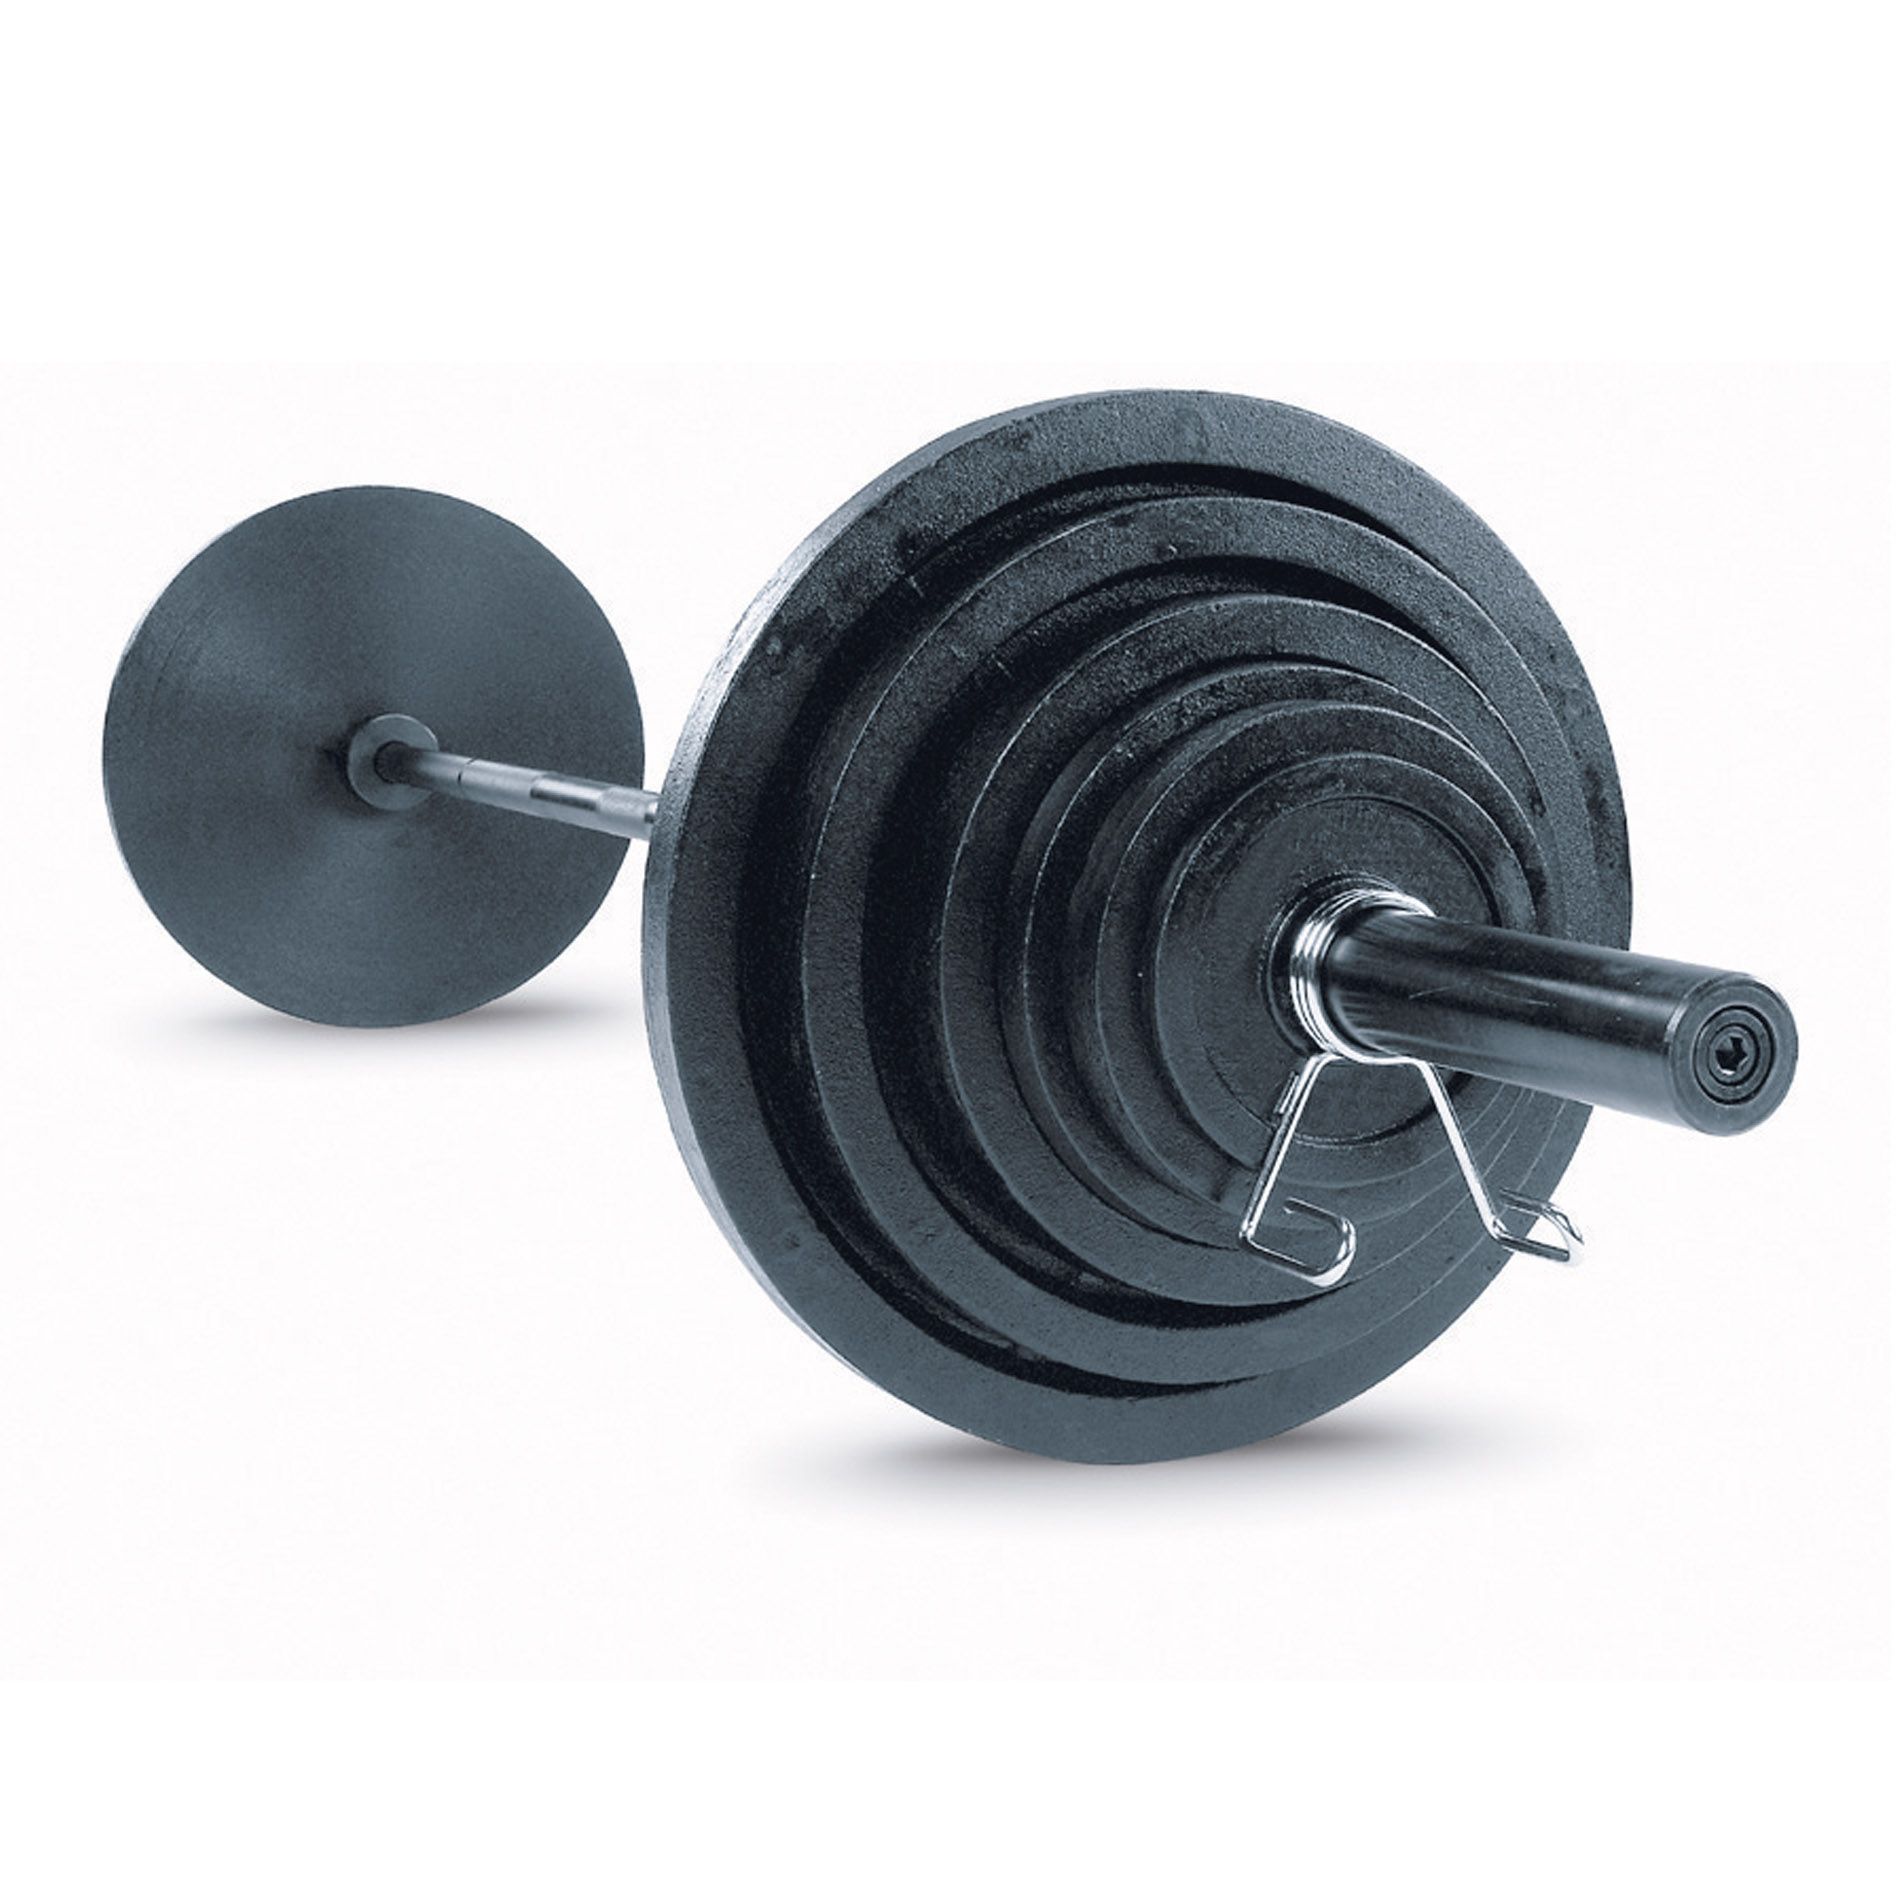 Body-Solid Cast Olympic Plate 500 lb. Weight Set with Black Bar